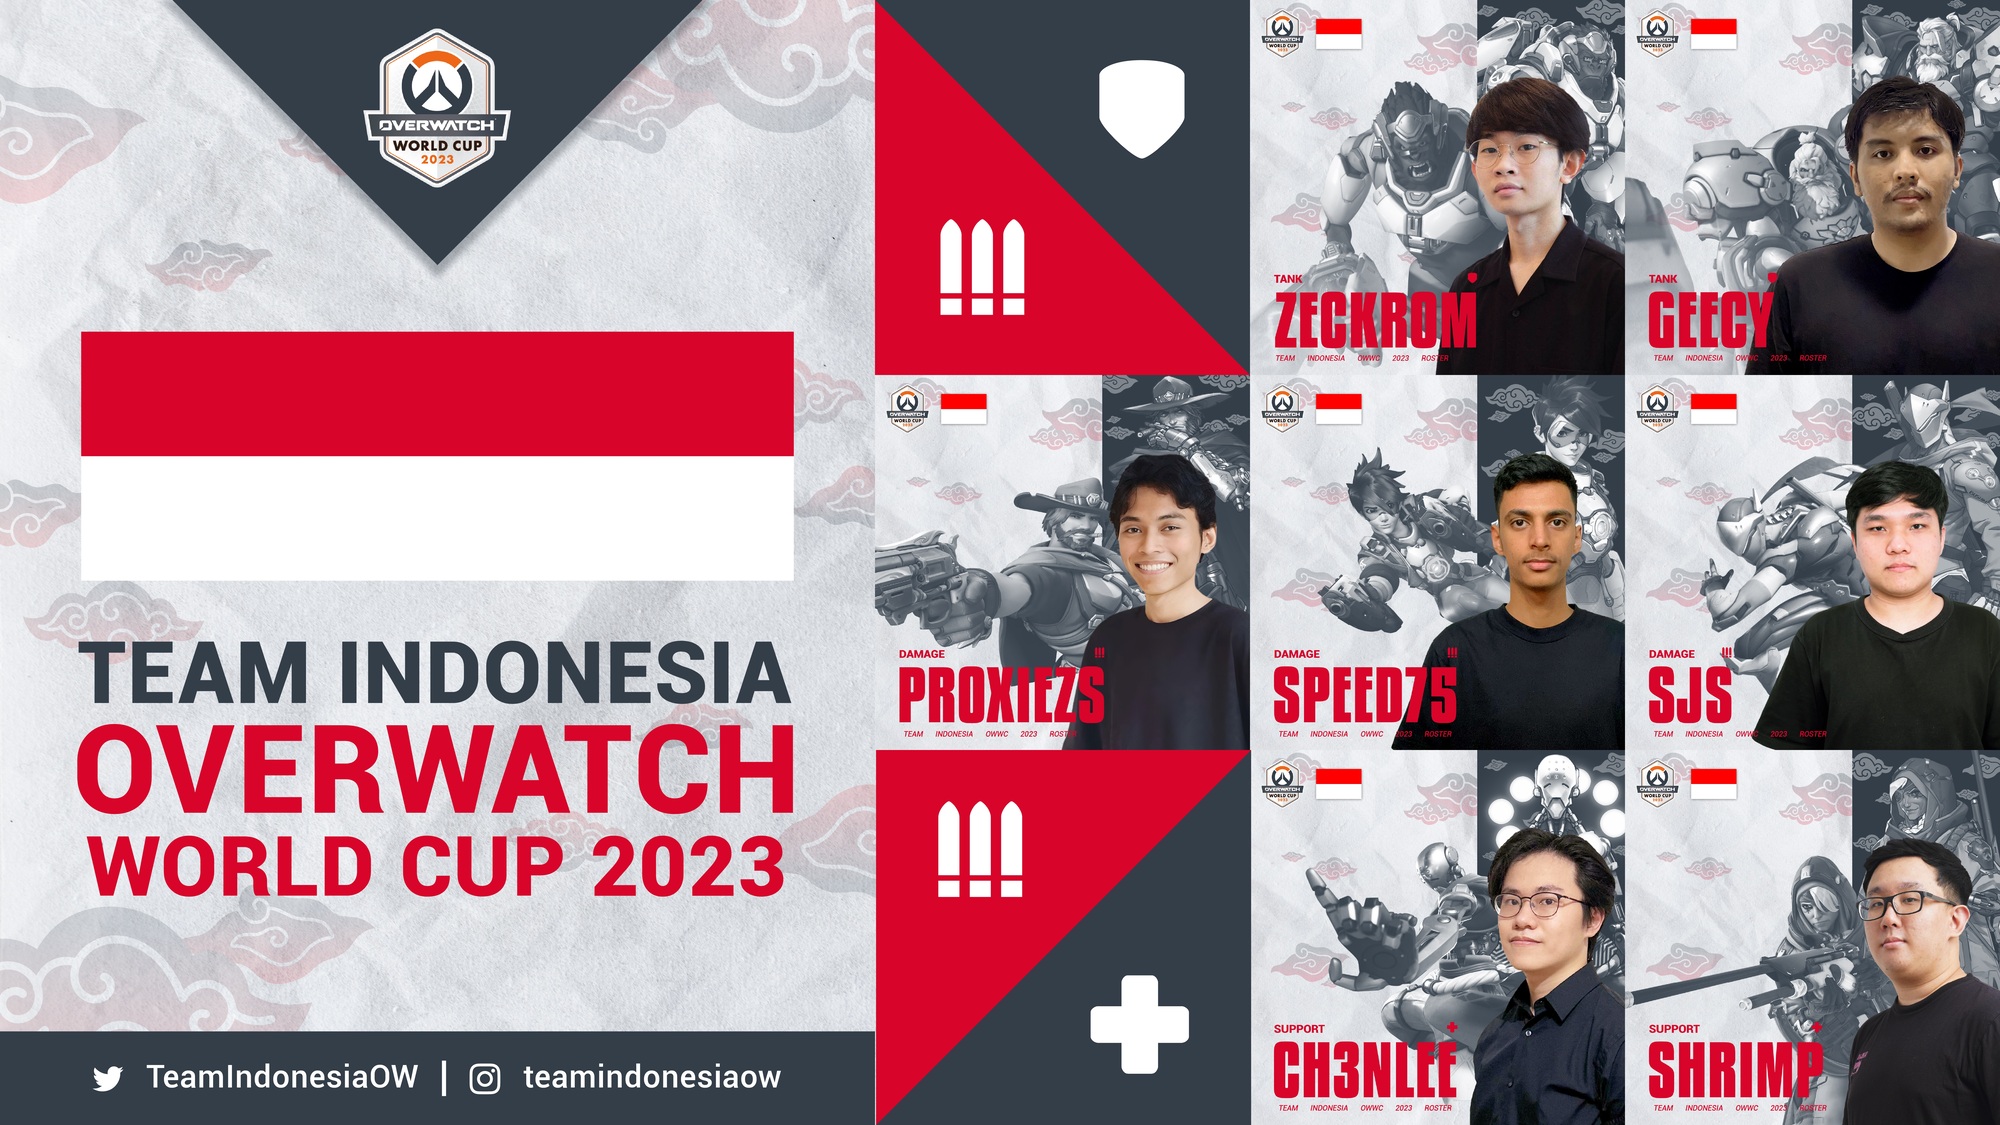 Overwatch World Cup 2023 Indonesia